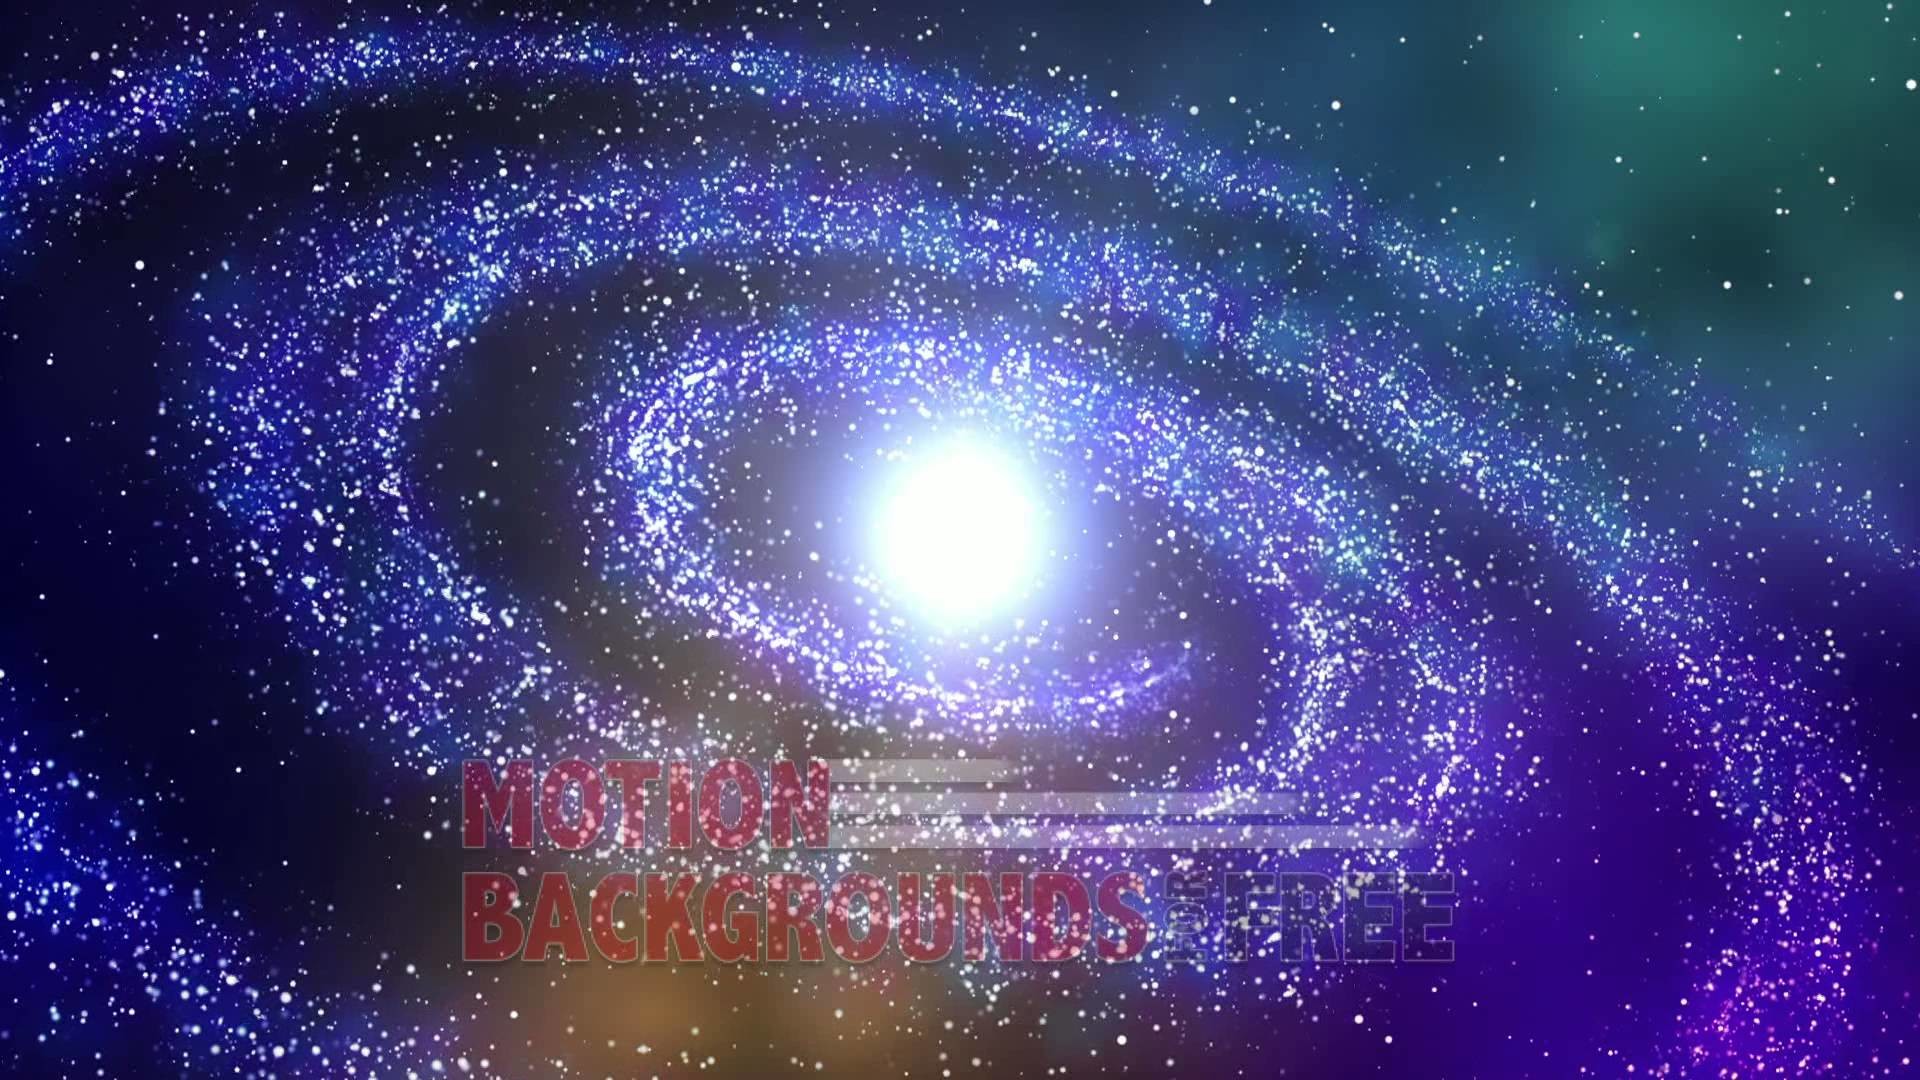 animated space wallpaper,galaxy,nature,spiral galaxy,universe,astronomical object